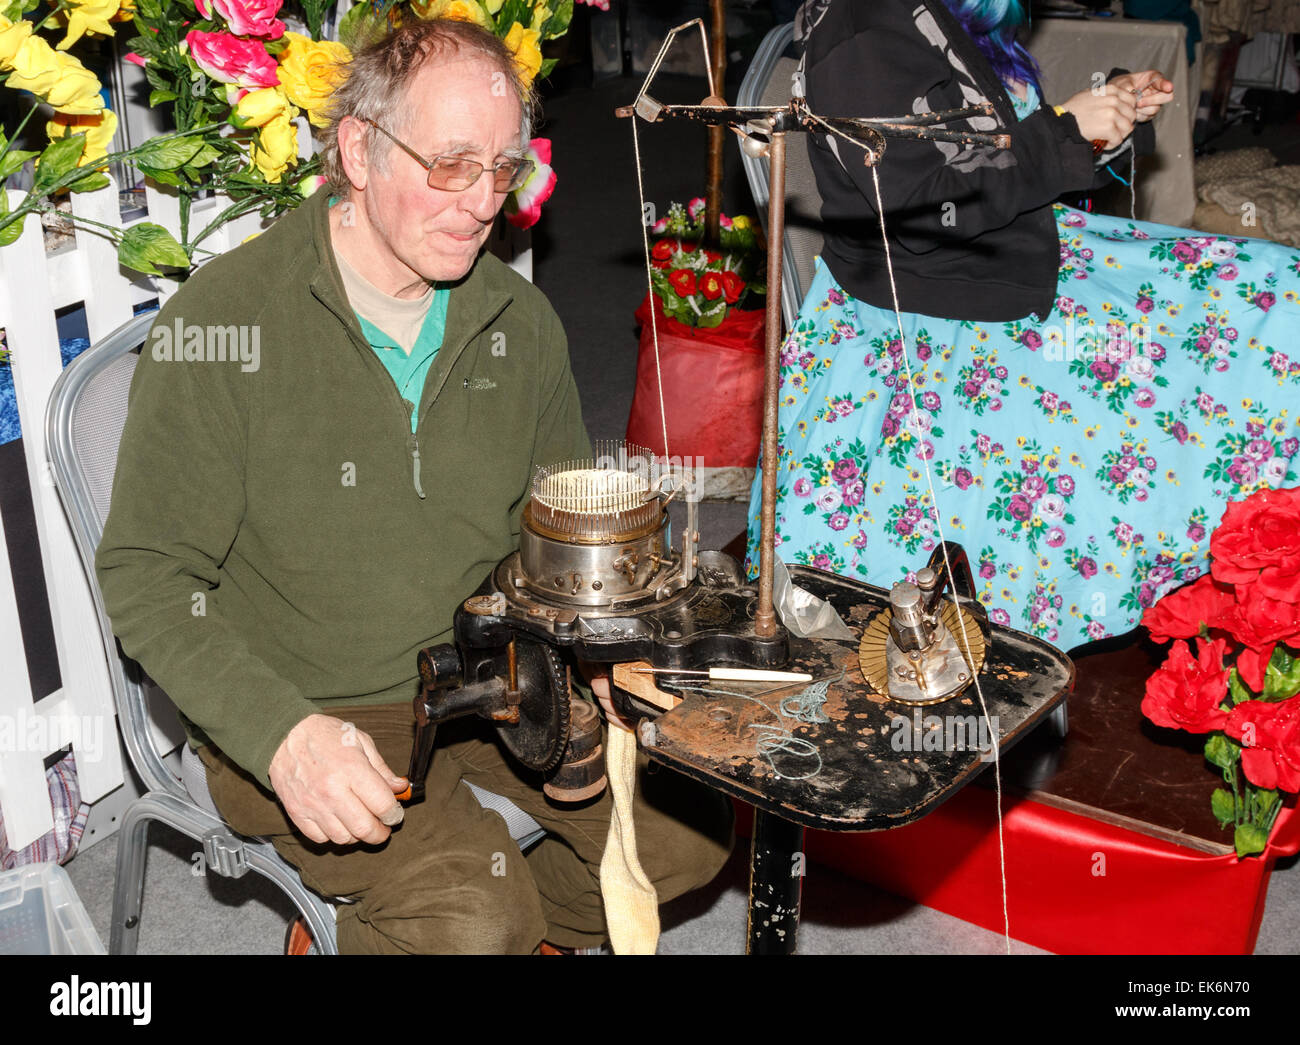 Circular sock making machine being used by a middle-aged male.  The machinery is antique. Stock Photo